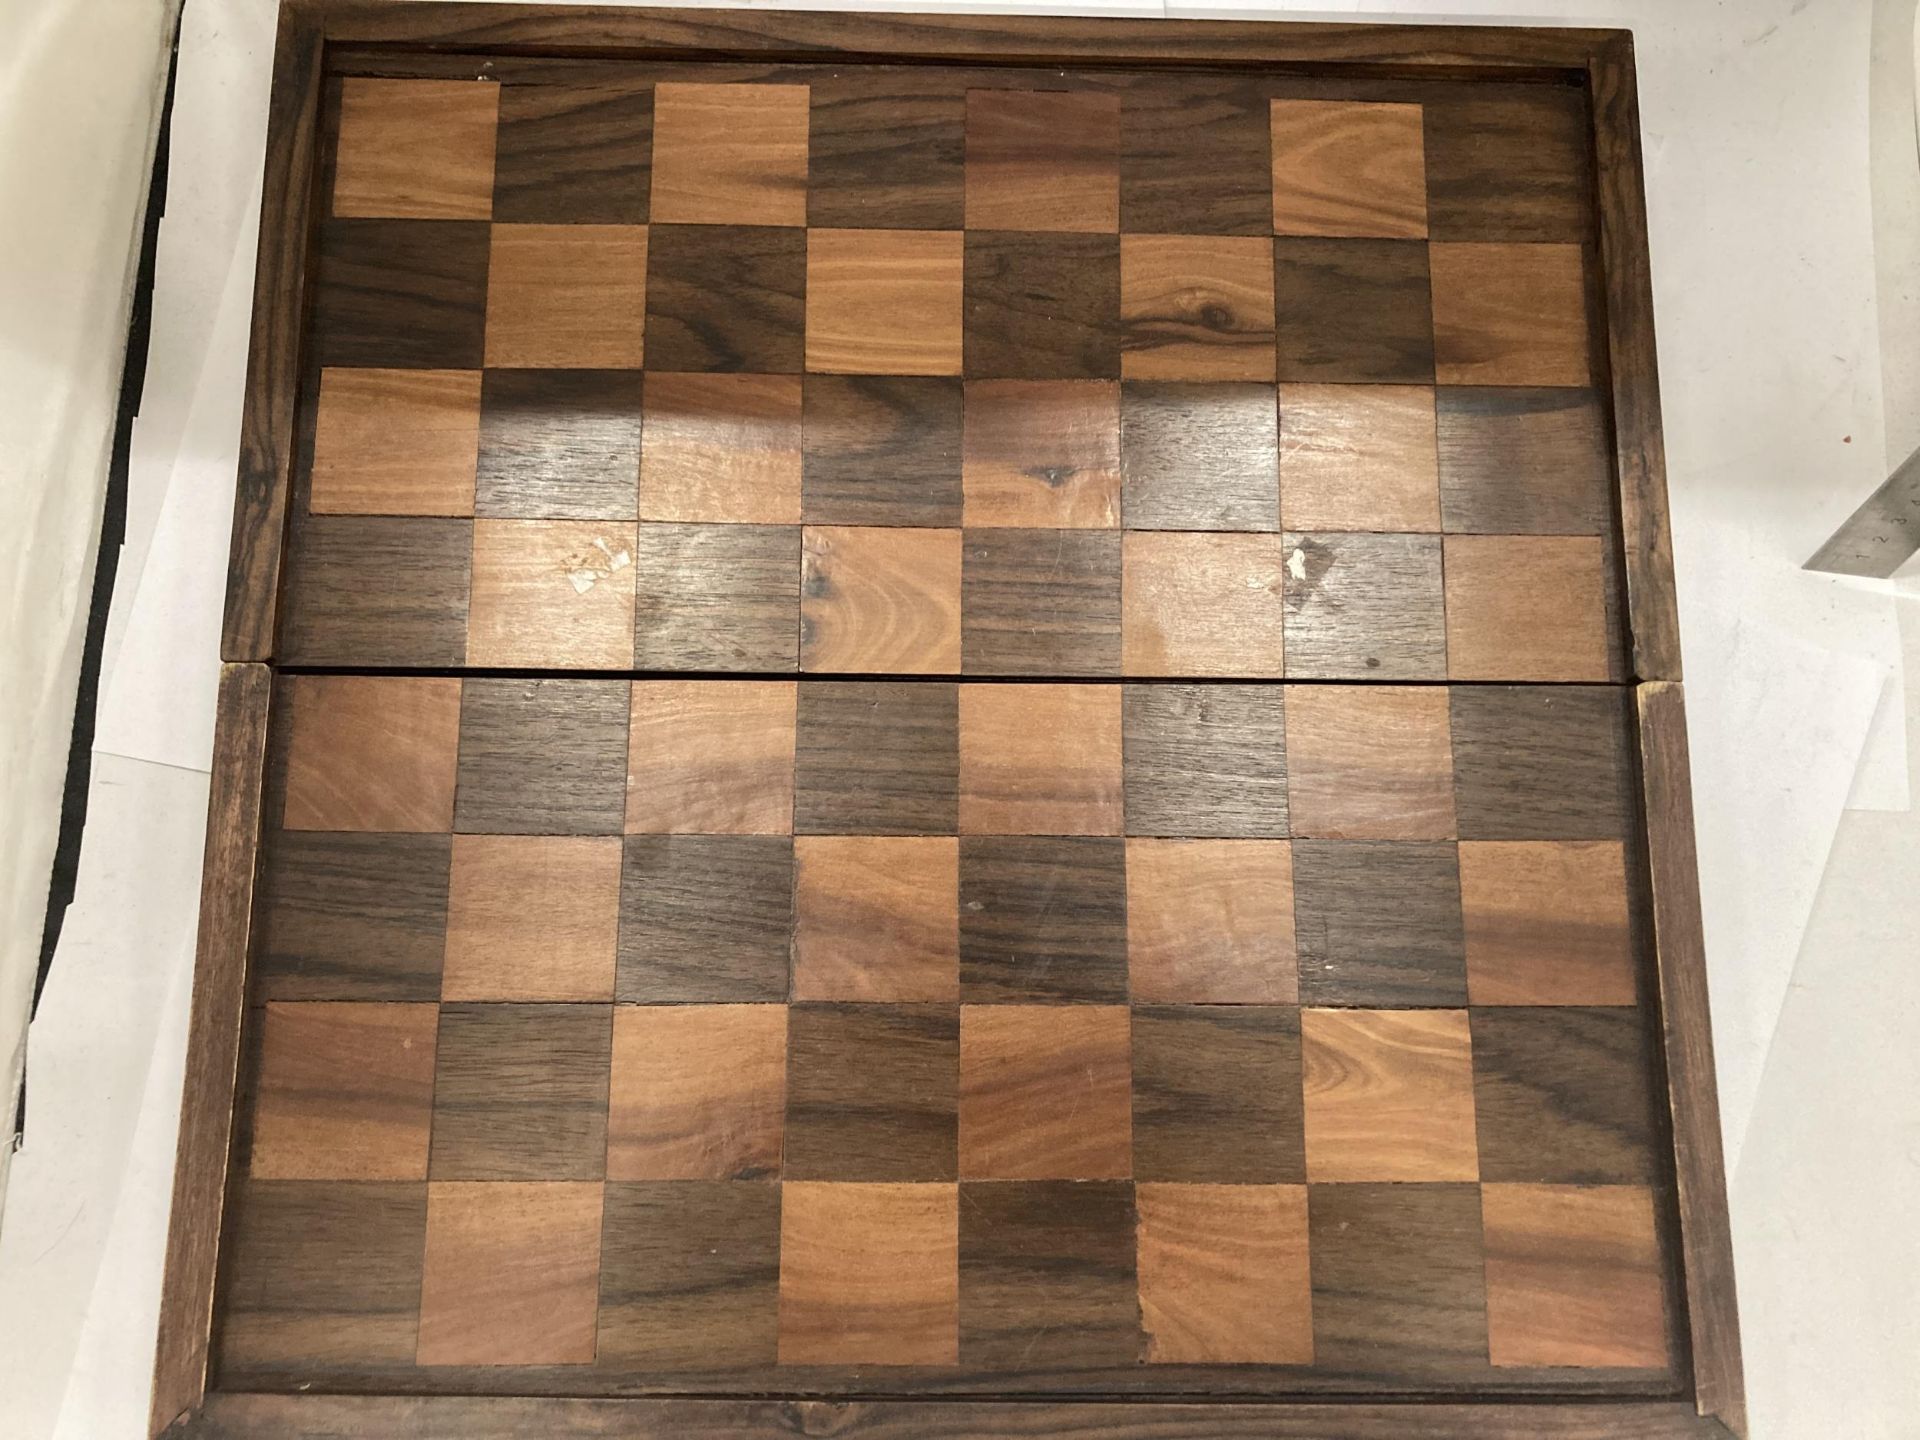 A VINTAGE HARDWOOD CHESS BOARD WITH CARVED WOODEN PIECES - Image 3 of 3